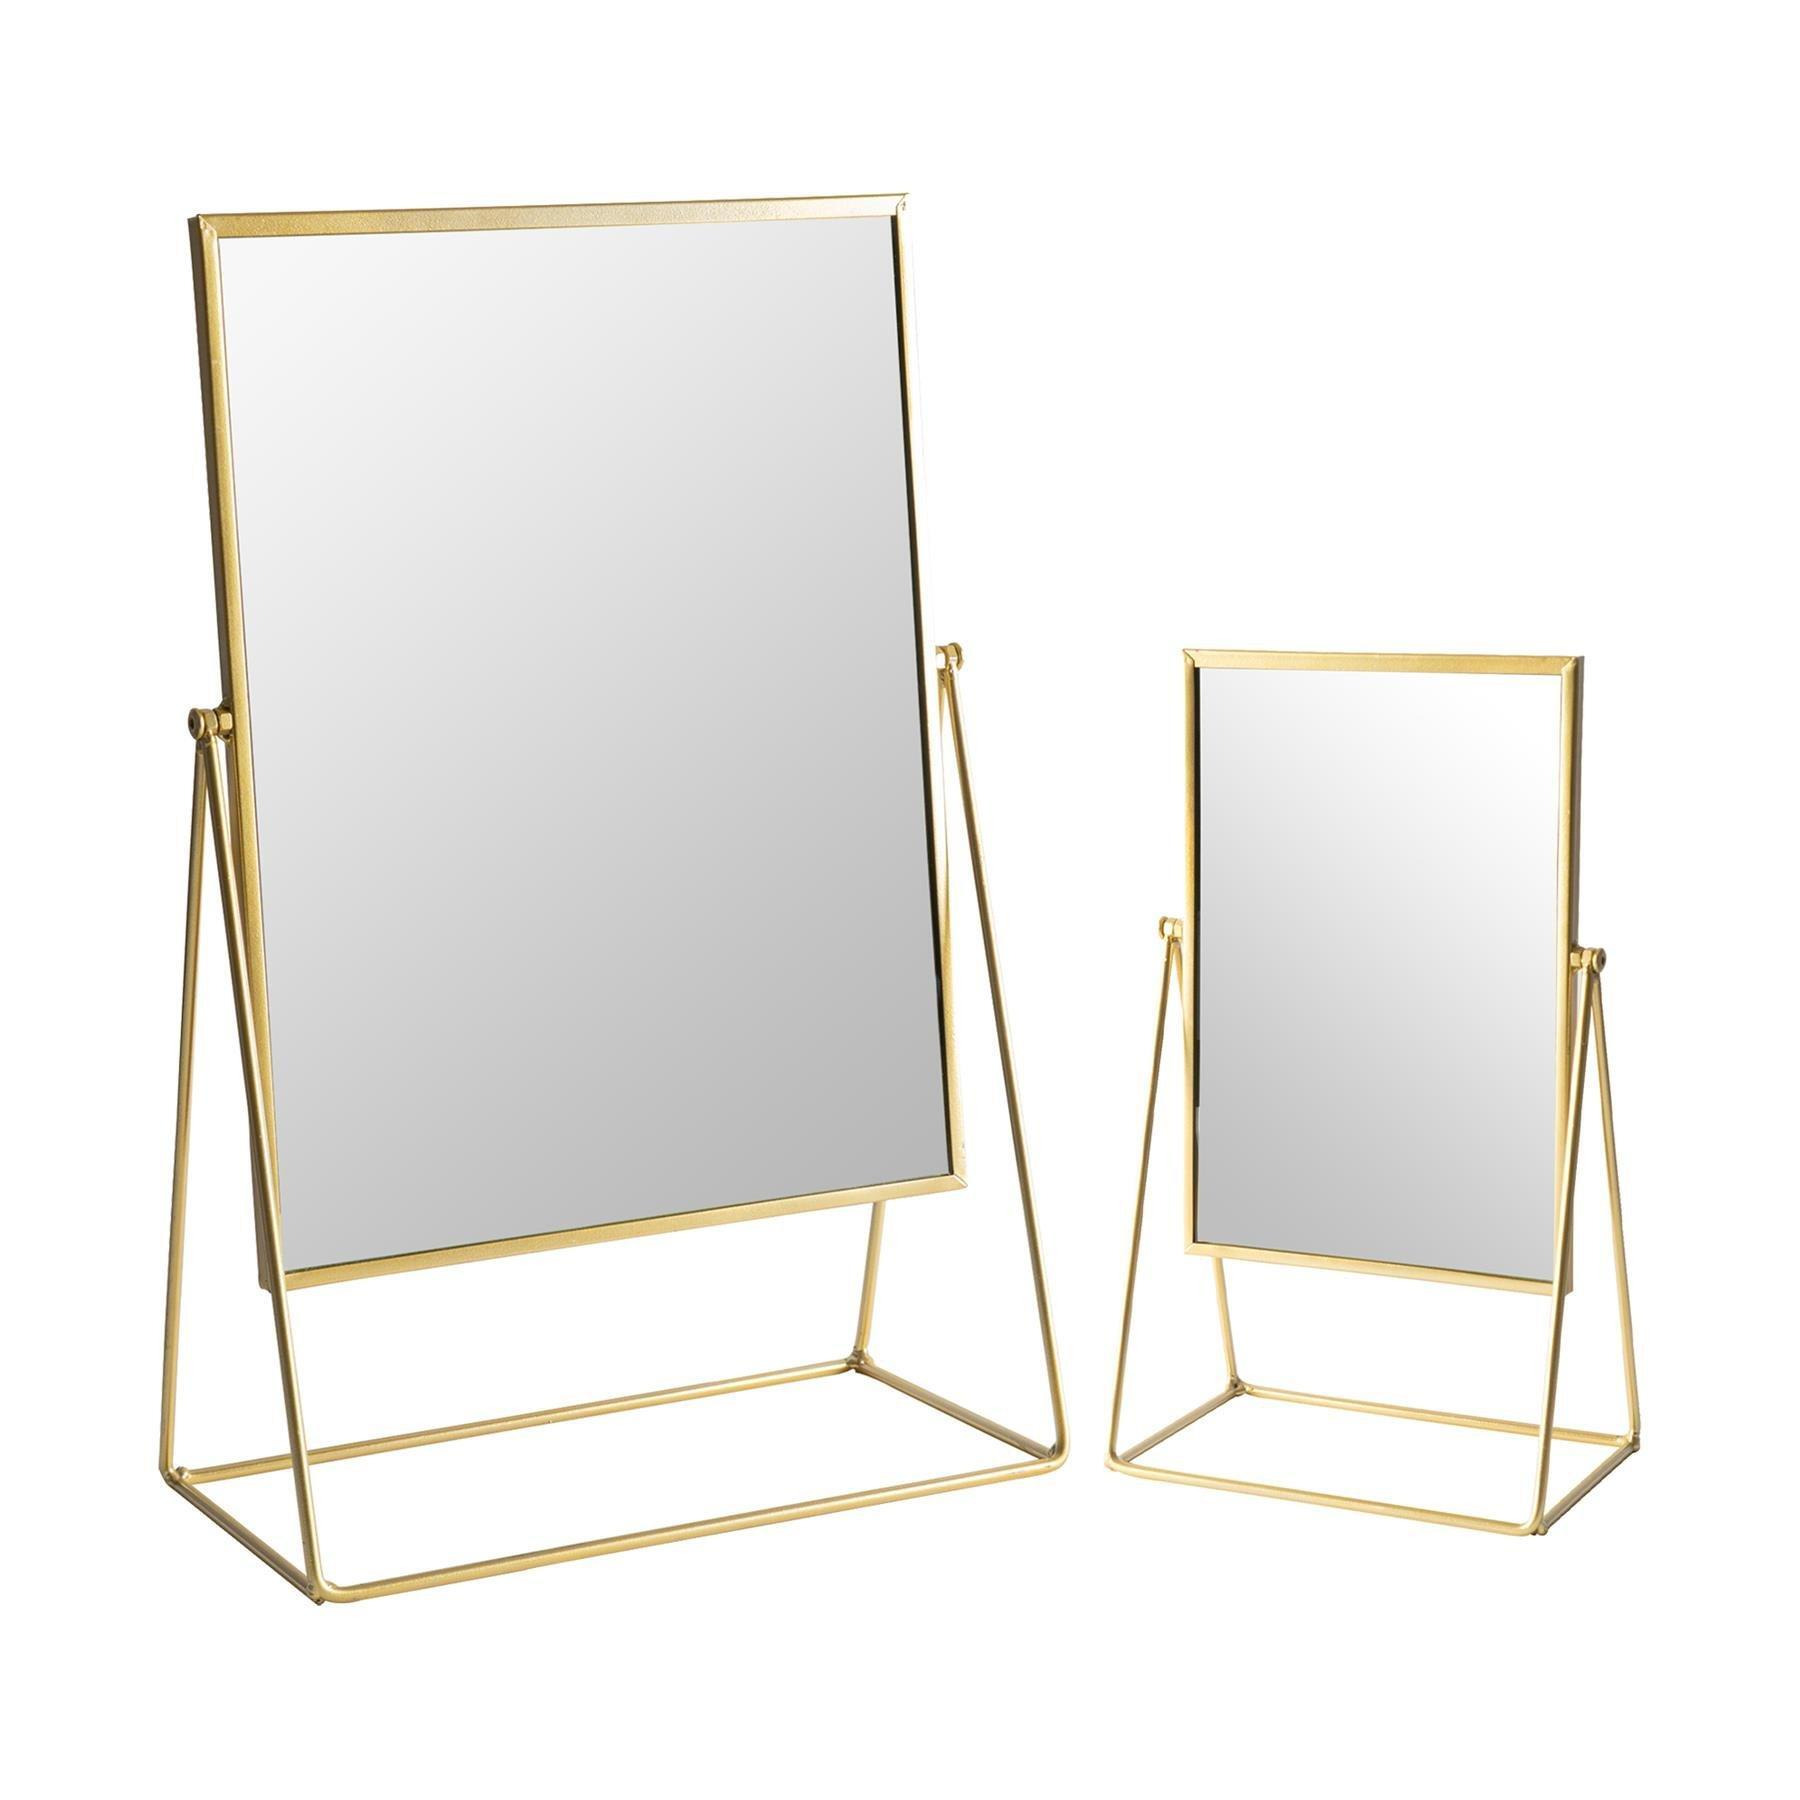 2 Piece Square Dressing Table Mirror Set 2 Sizes - image 1